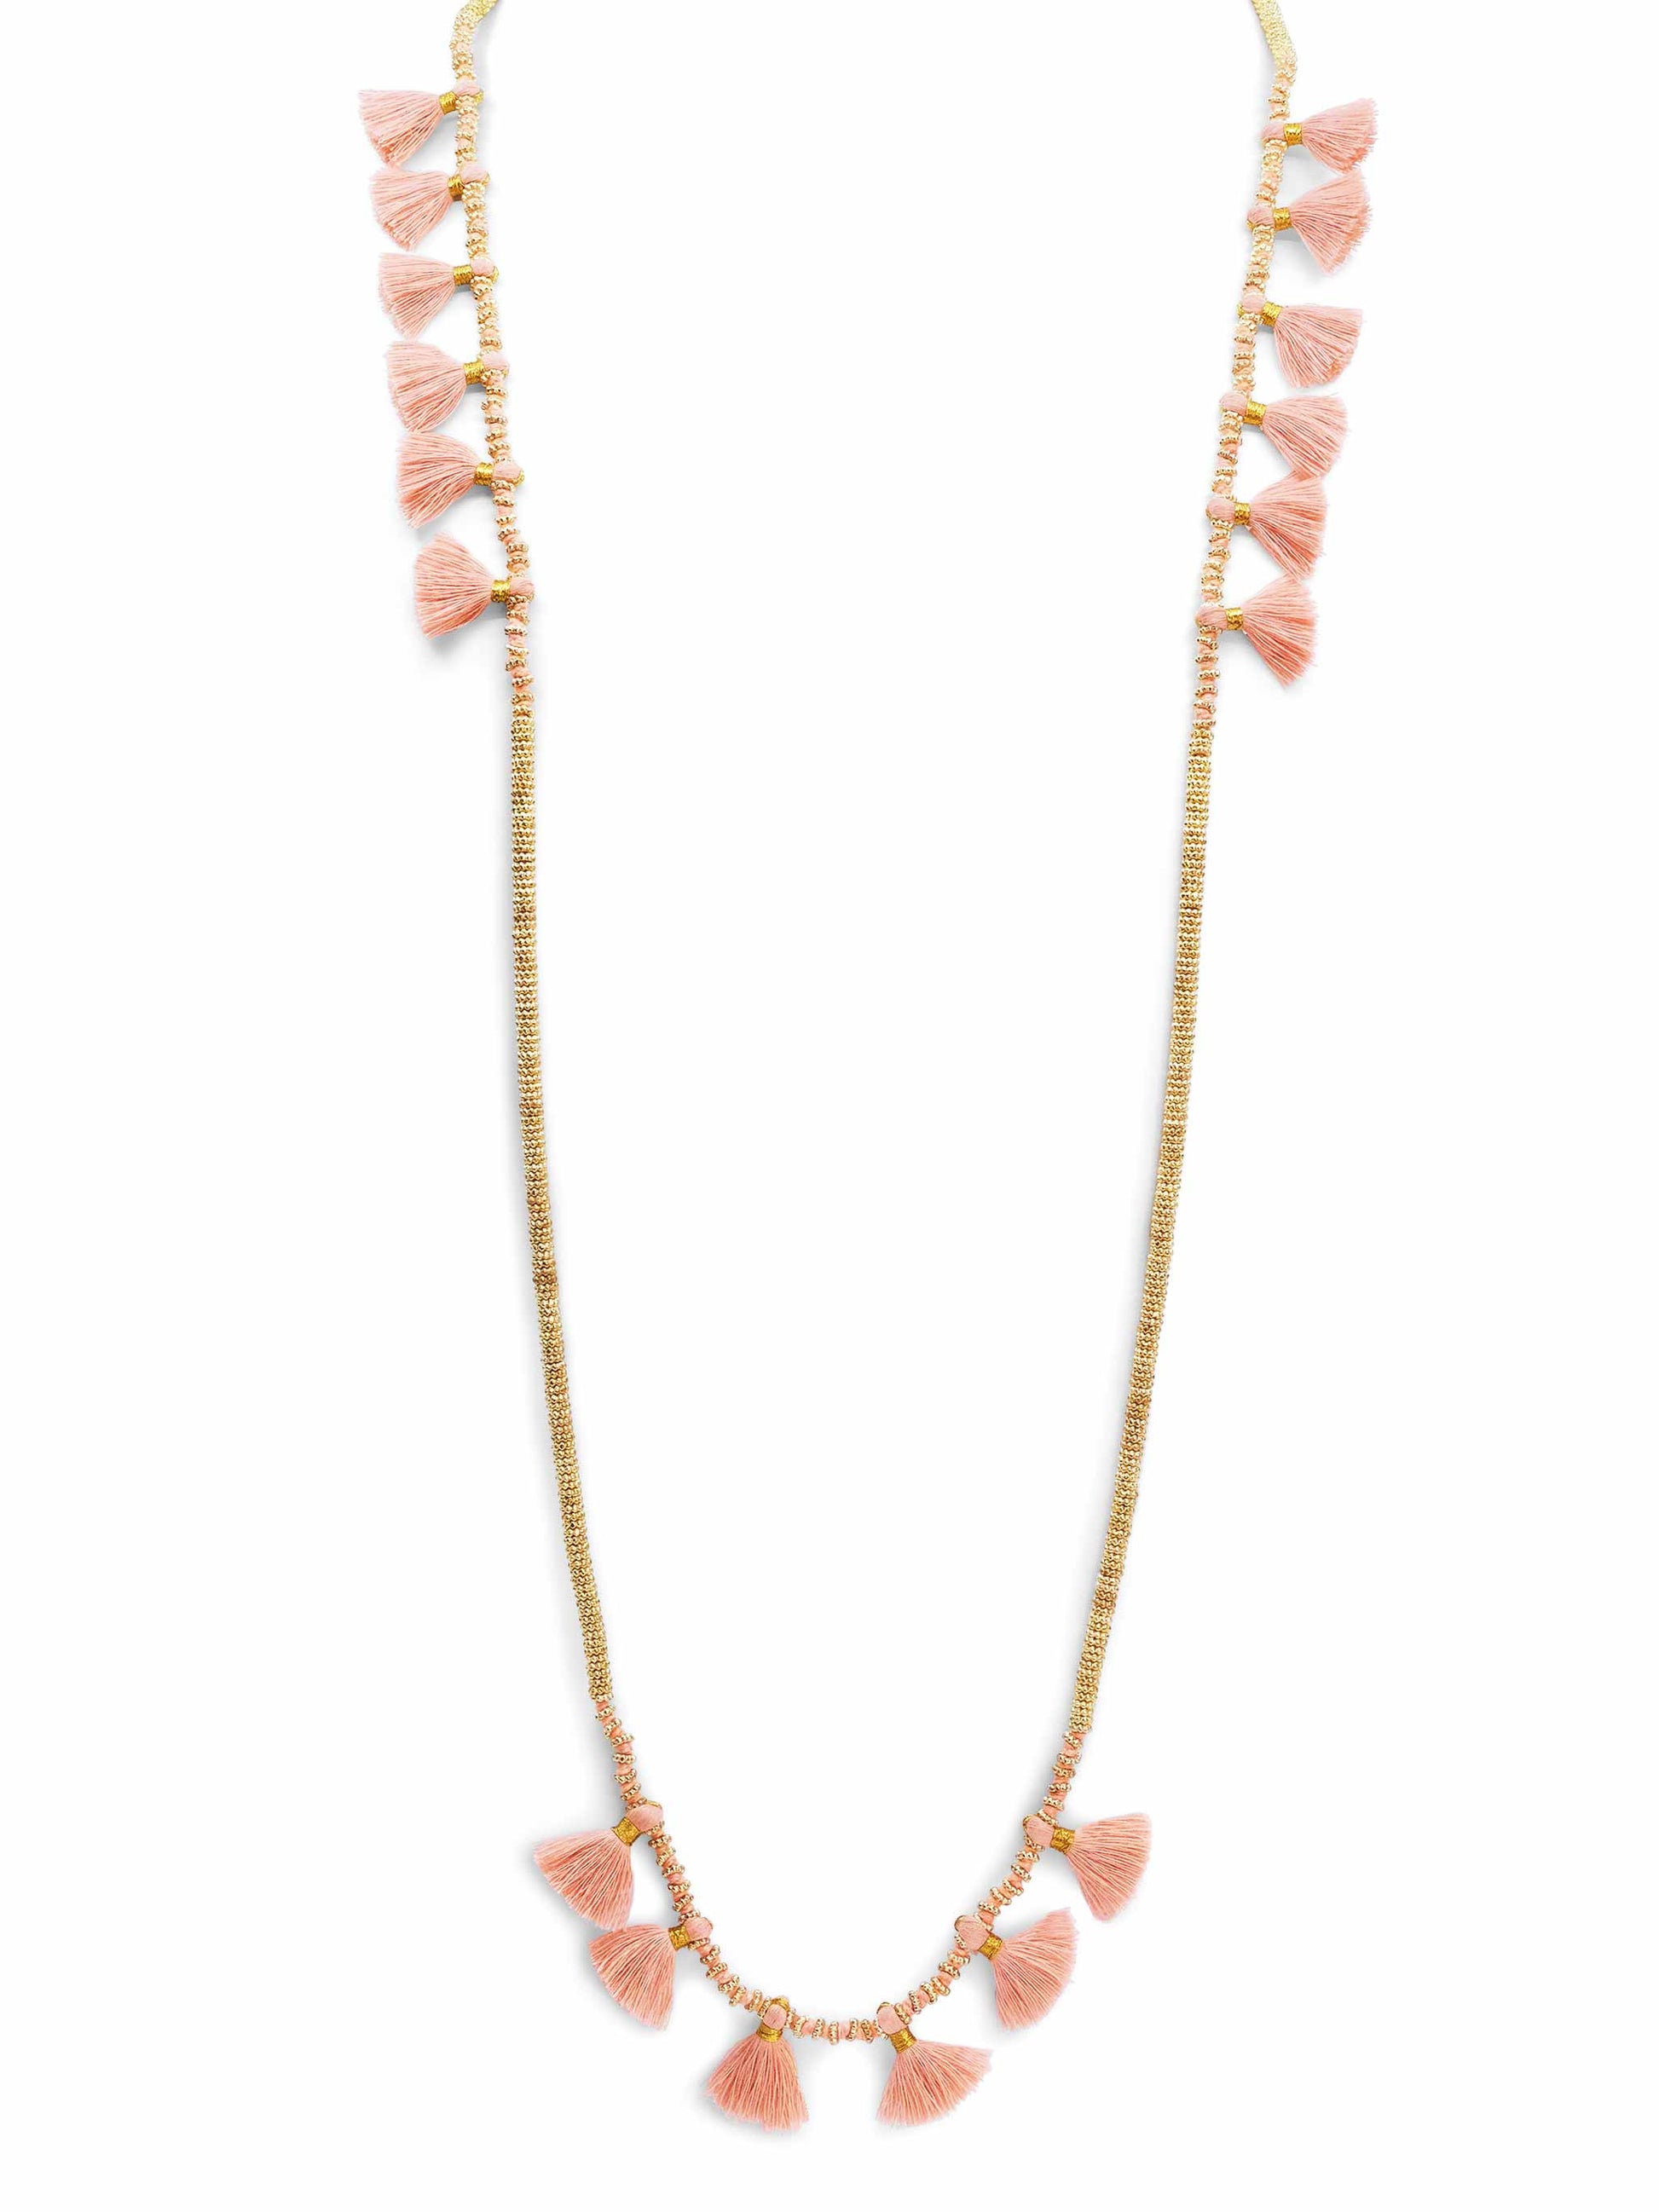 Bohemian Pink Fringe & Gold Necklace with Peach Tassels